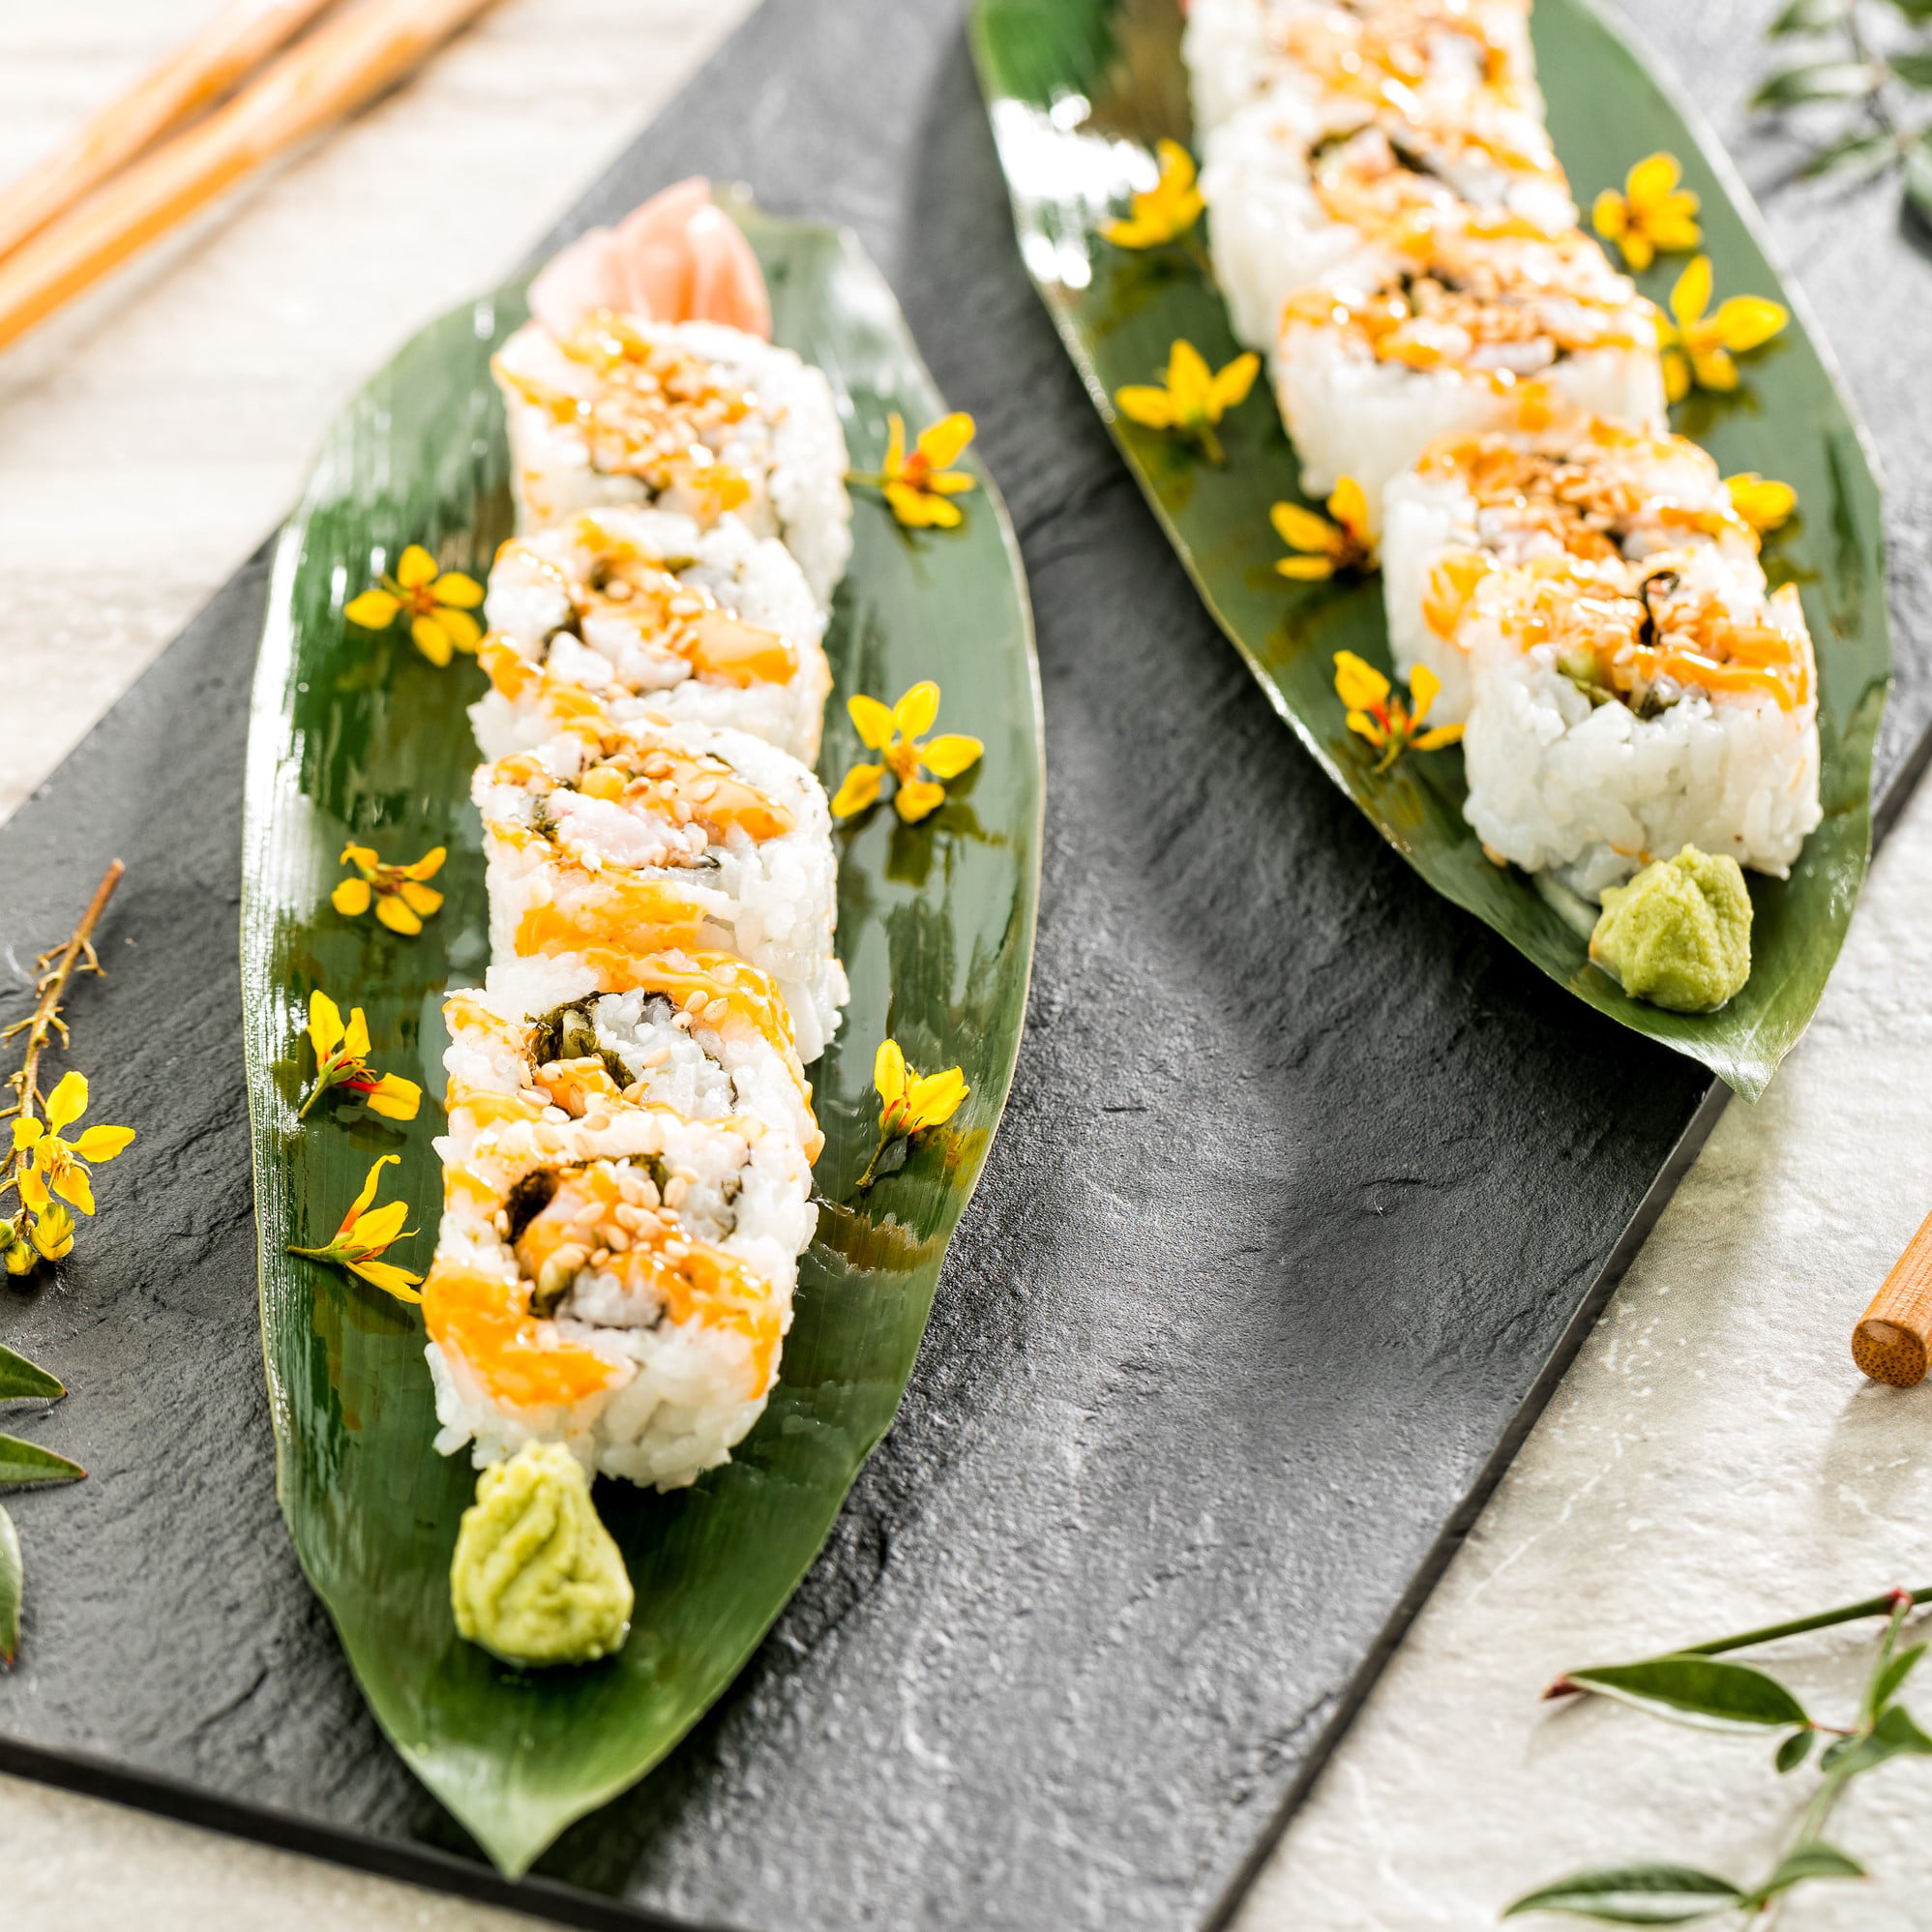 Details about   Bamboo Leaves Decoration for Sushi Roller Plate Vacuum Packed 12.25 x 3.5" Fresh 